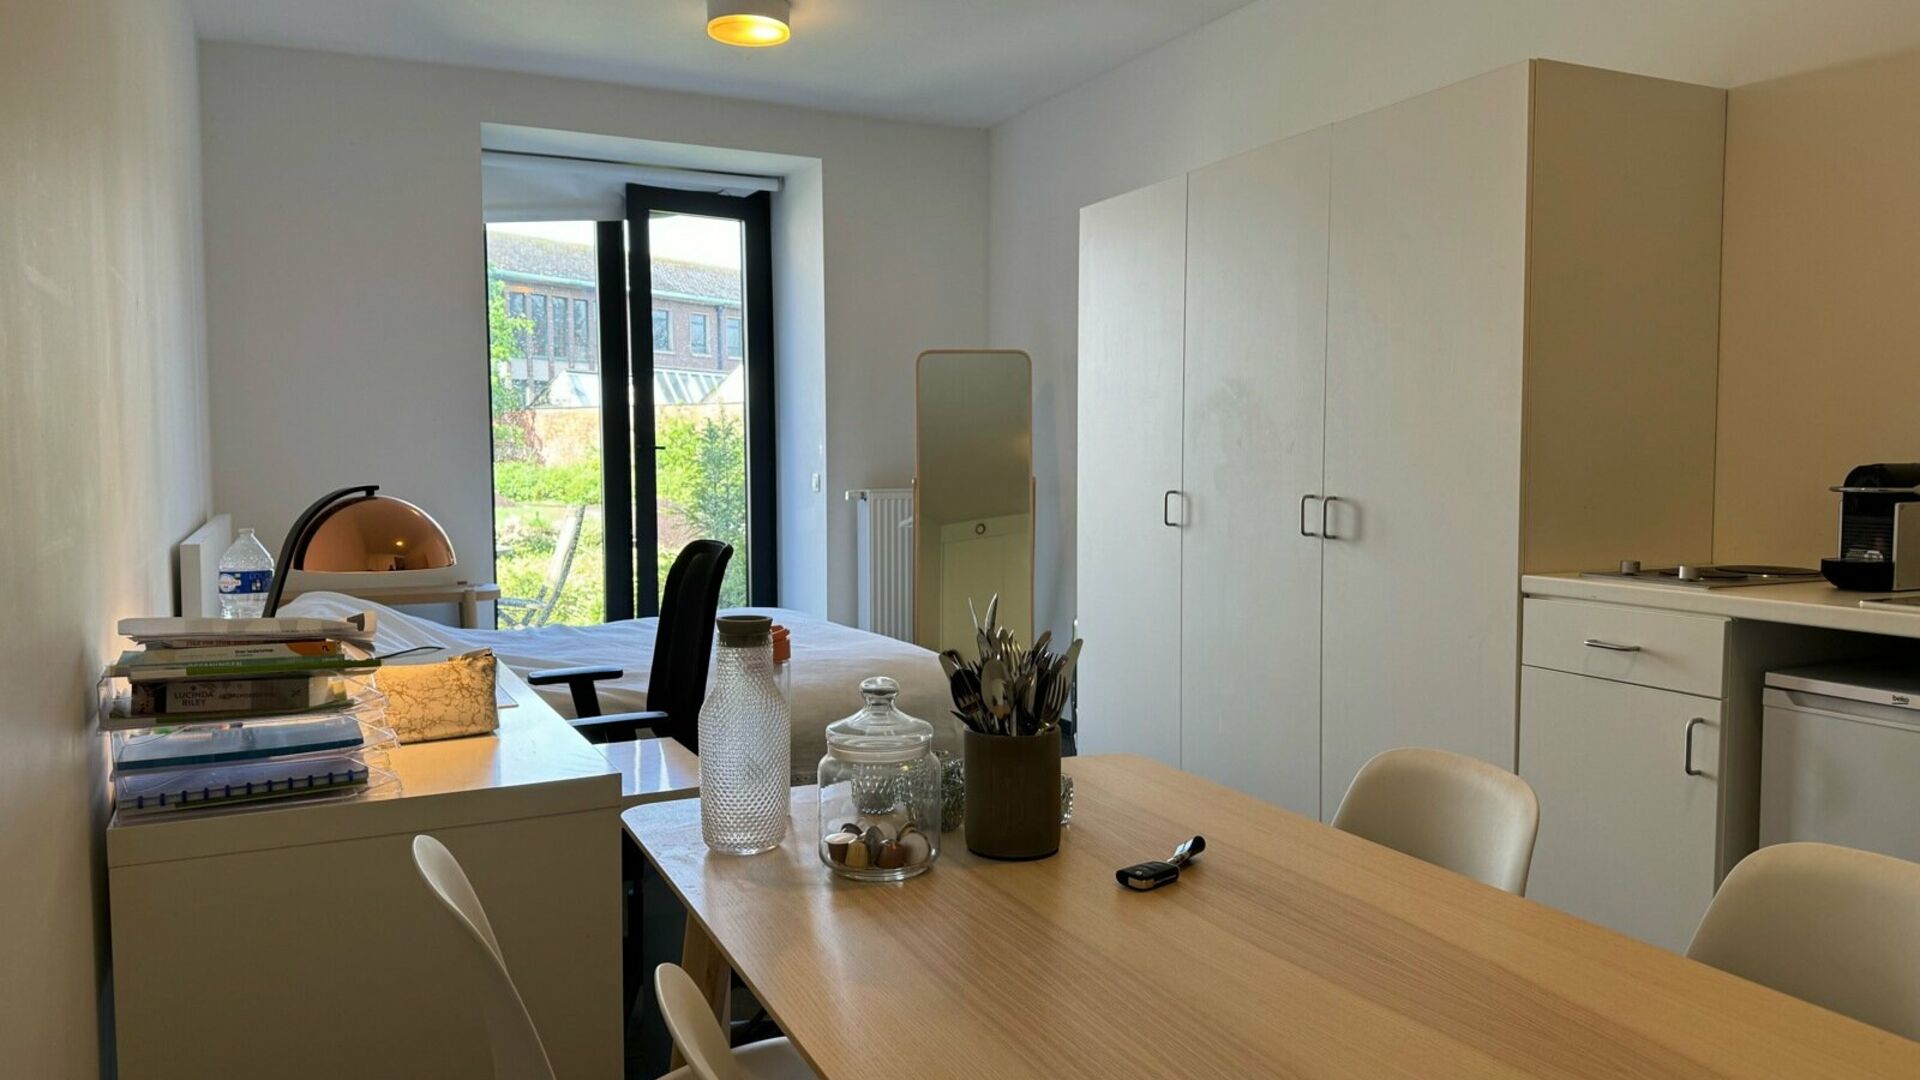 Luxurious studio, of no less than 28 m² and with its own private terrace of 23m² in the heart of Leuven near Grote and Oude Markt. This room is located on the ground floor at the back and enjoys a beautiful view over the garden. The studio has its own b